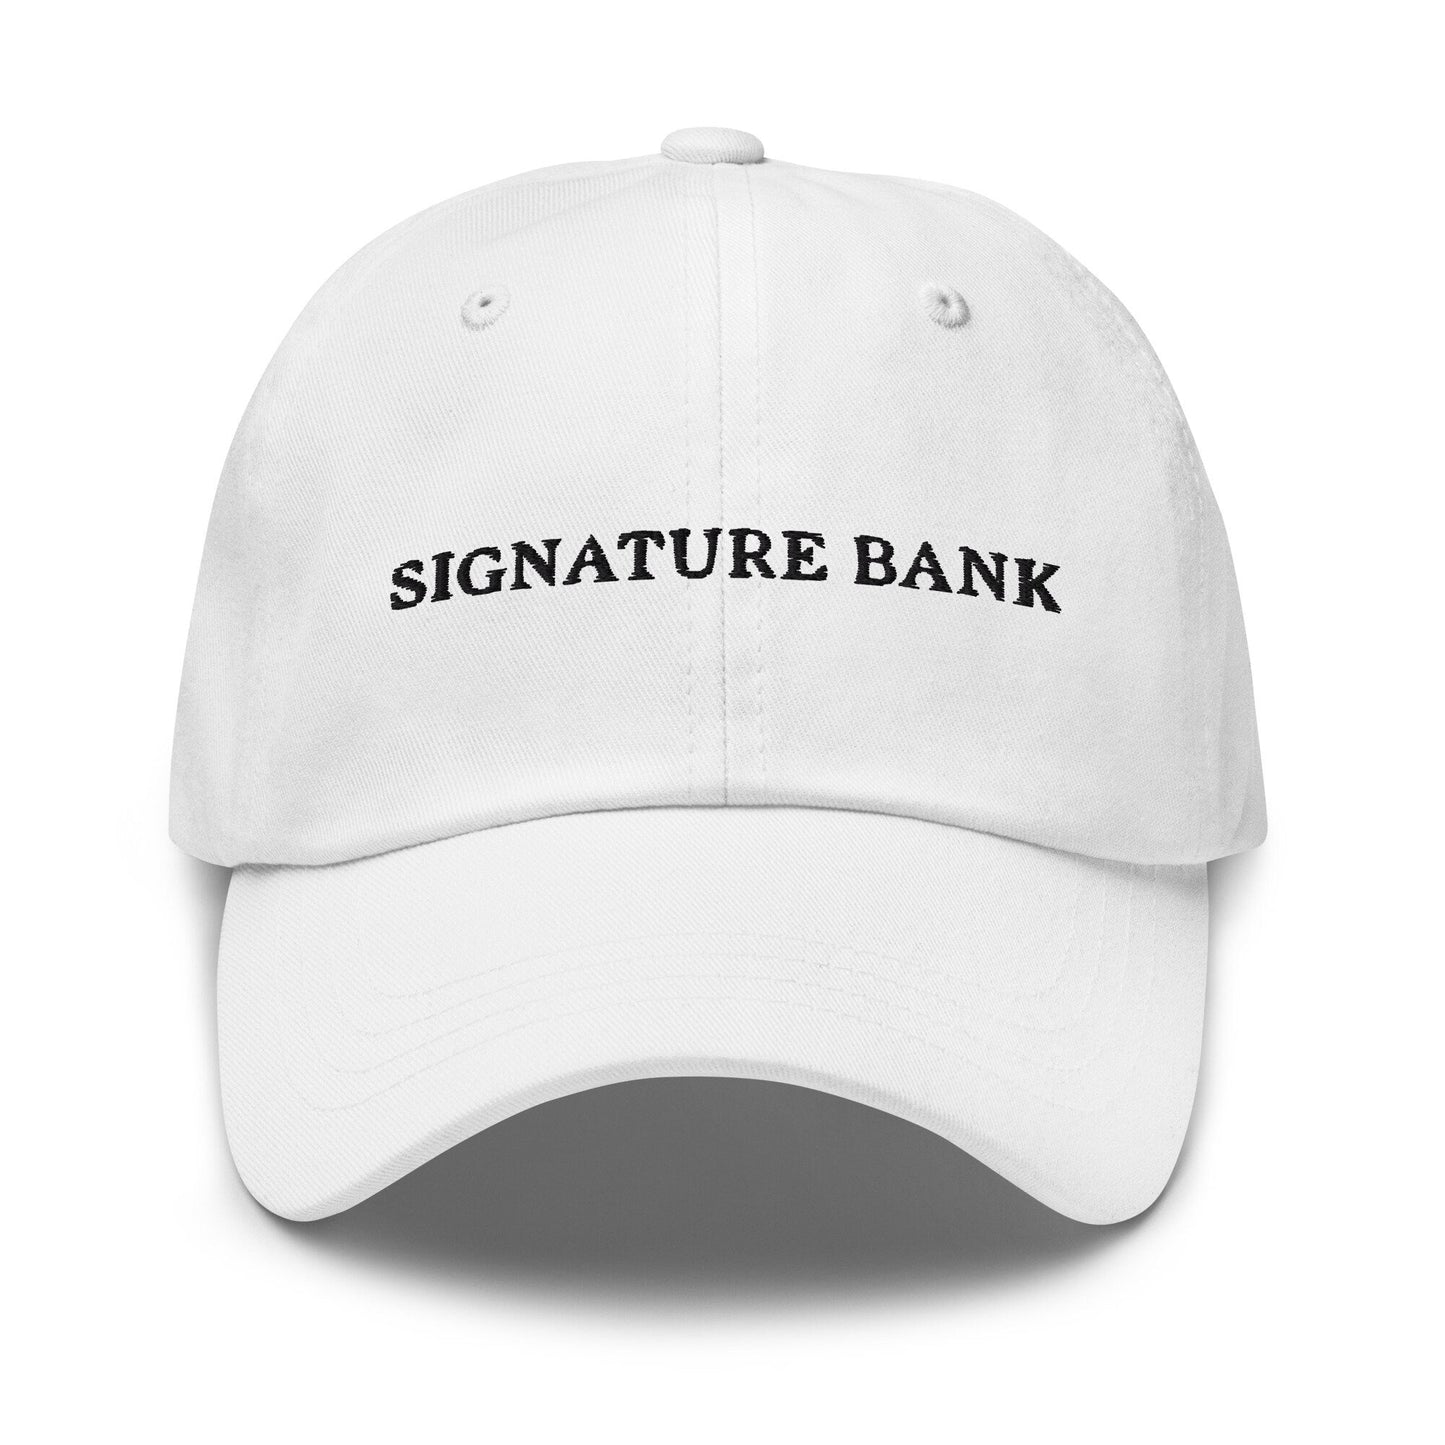 Signature Dad hat - Gift for Finance Bros & Bankers - Cotton Embroidered Cap - Evilwater Originals